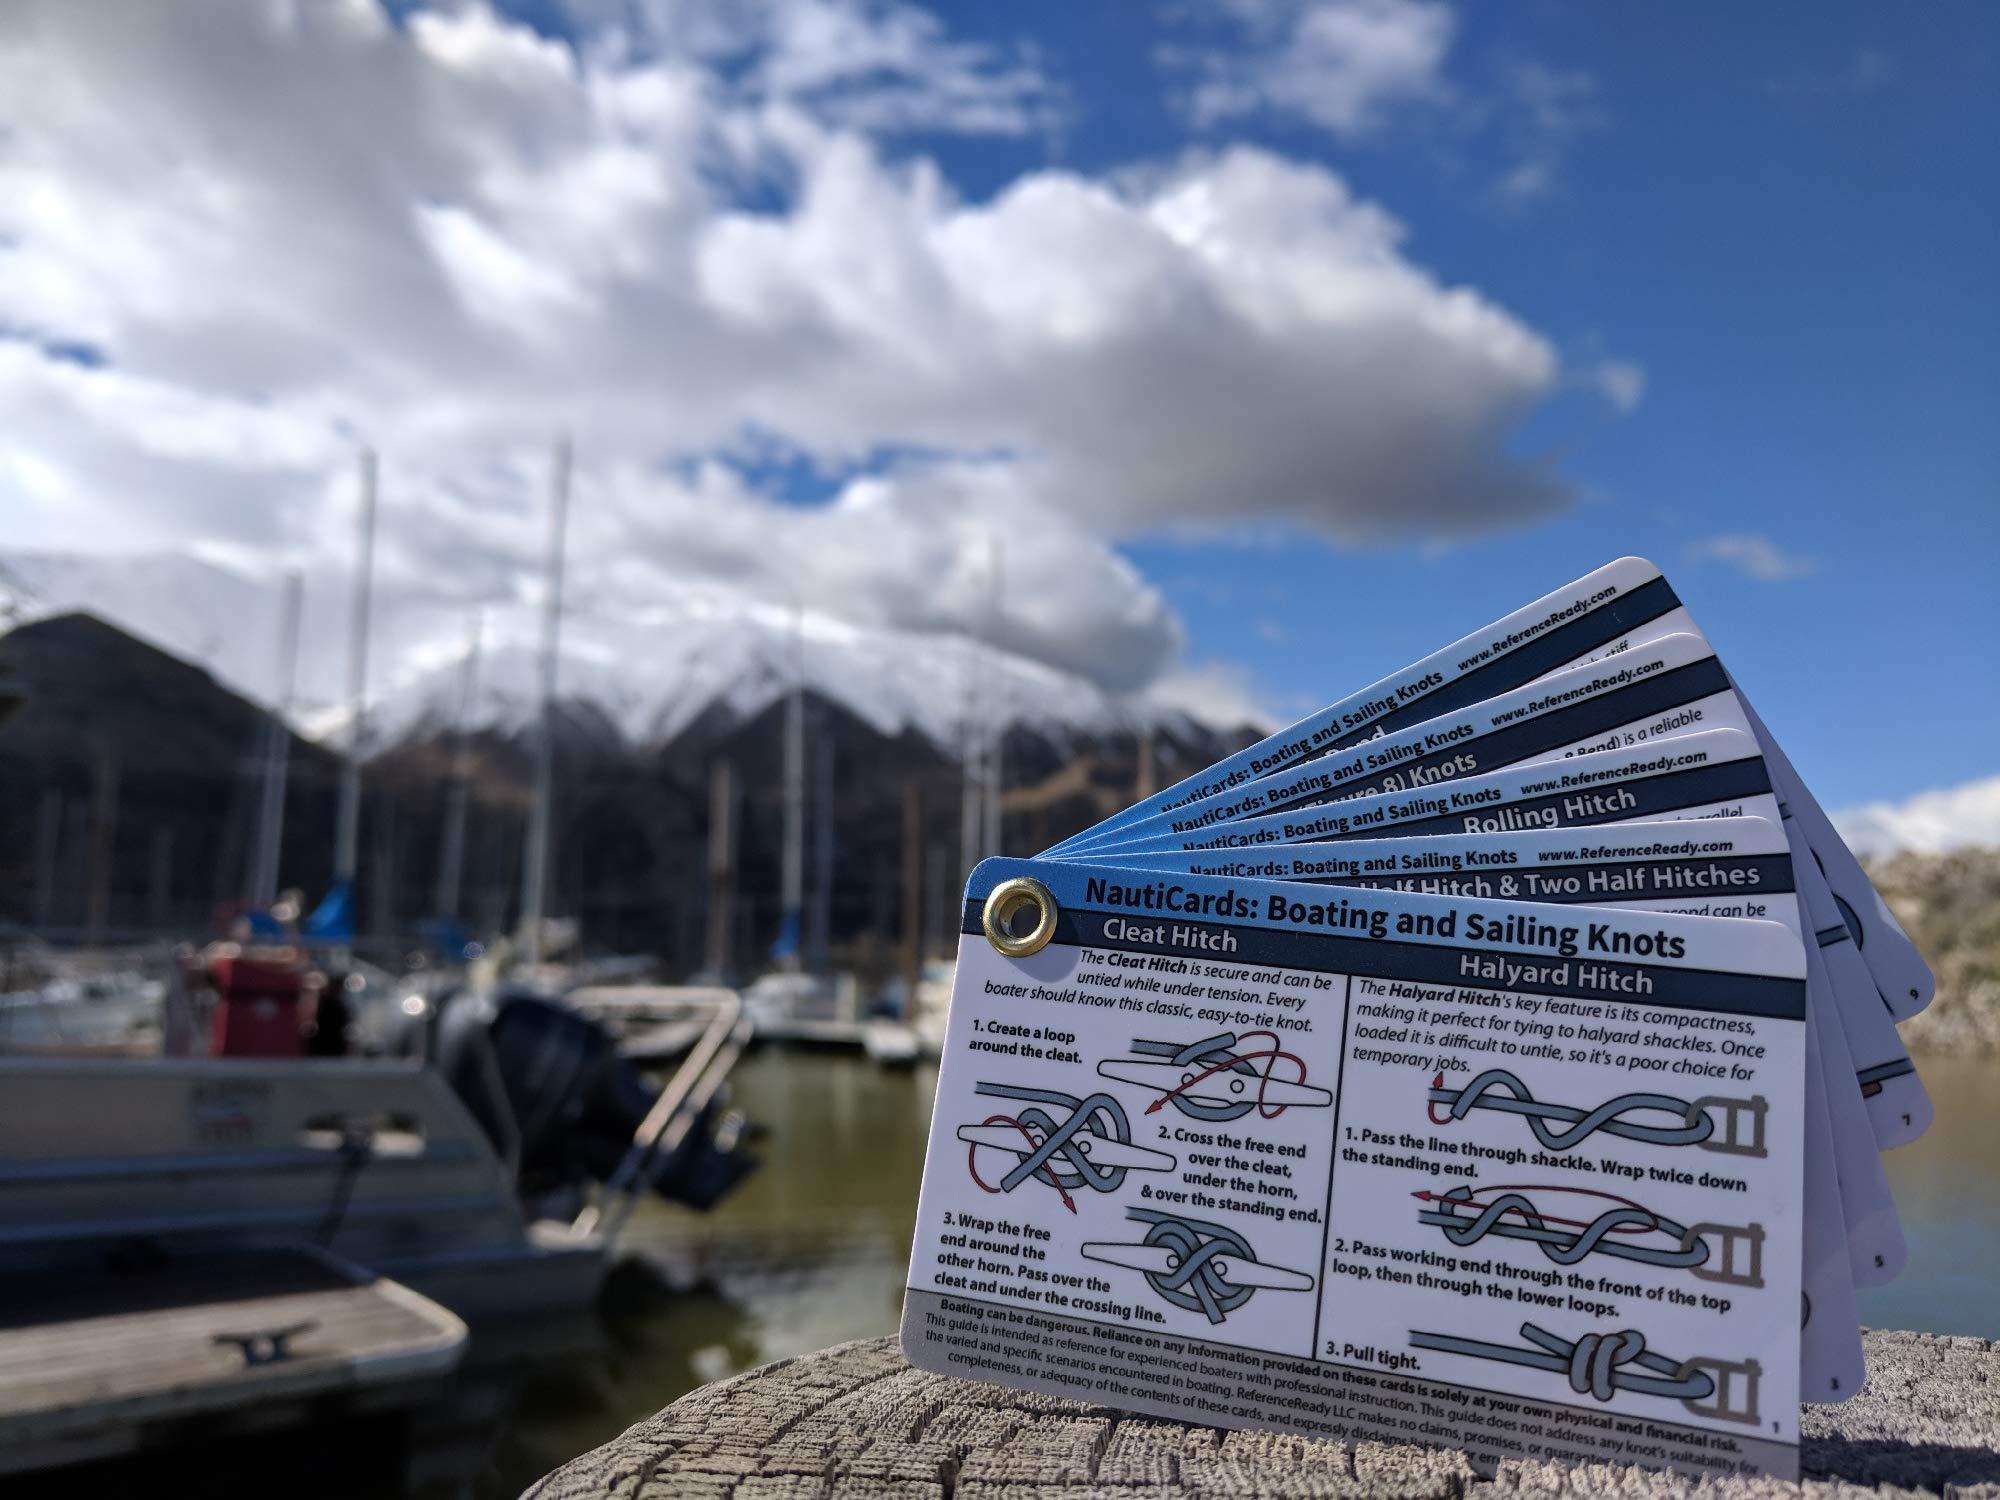 ReferenceReady Boating and Sailing Knot Cards - Waterproof Guide to 20 Nautical Knots